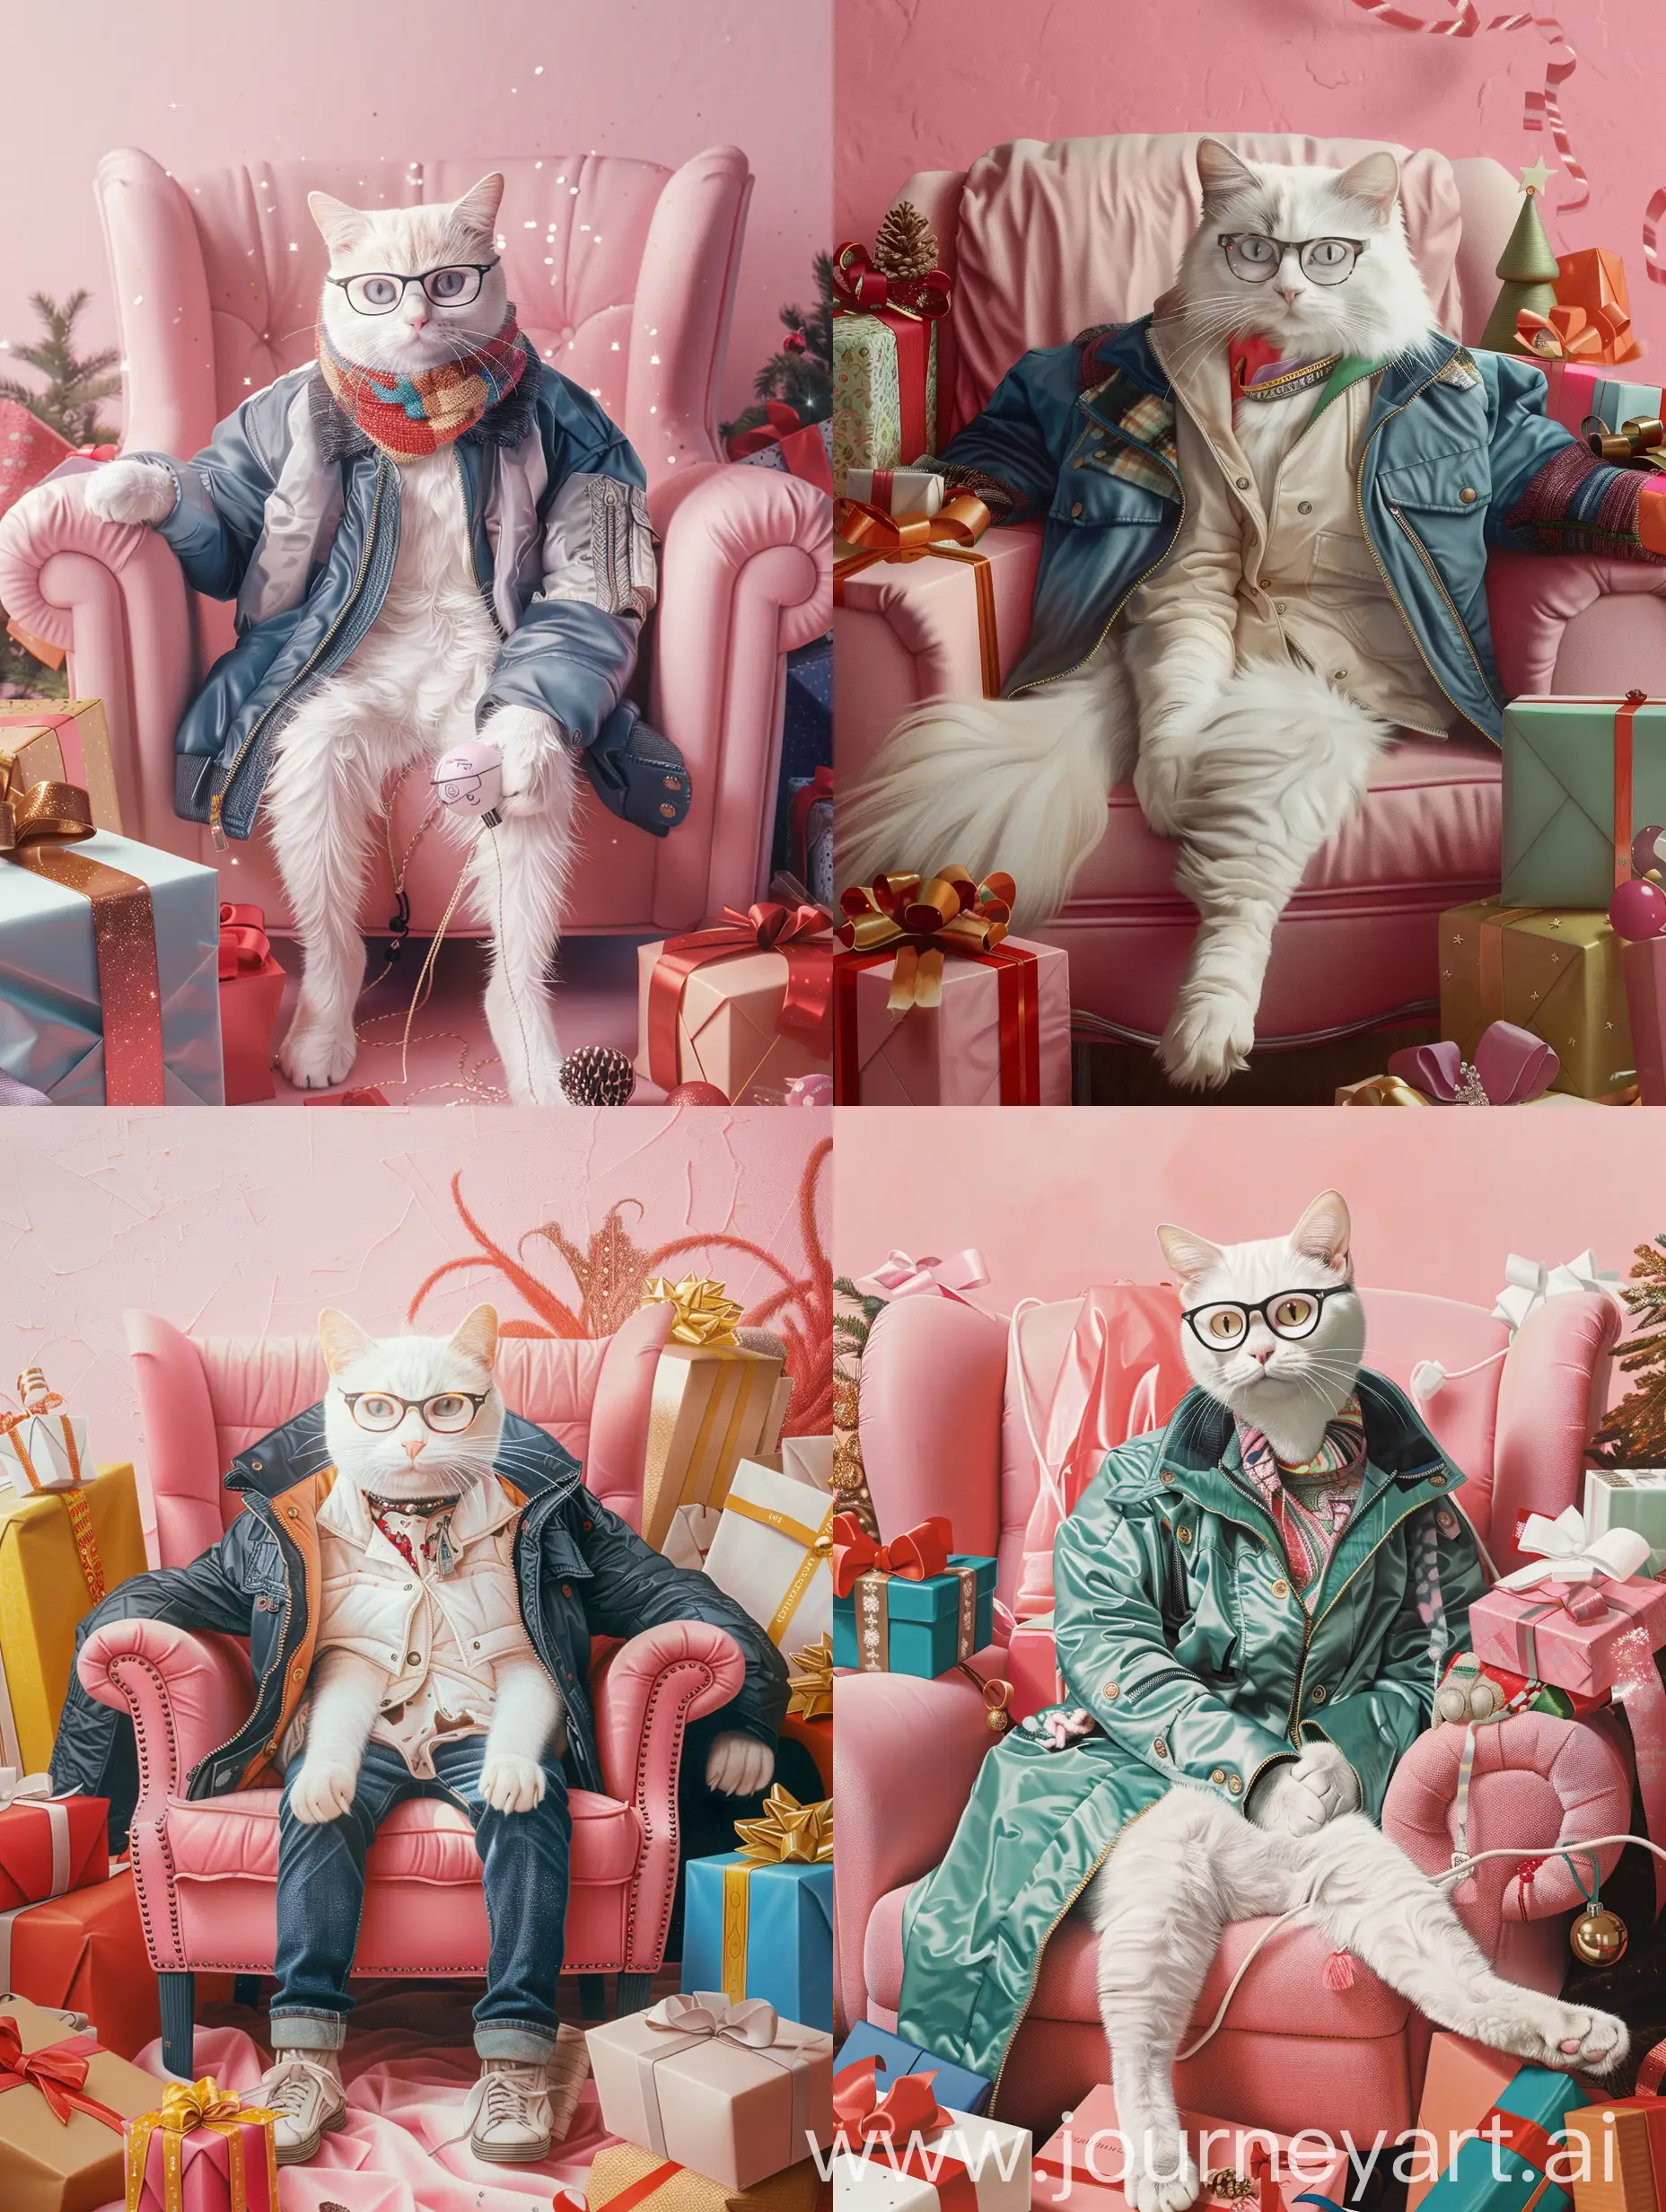 Fashionable-White-Cat-in-Glasses-and-Jacket-Surrounded-by-Gifts-on-Pink-Armchair